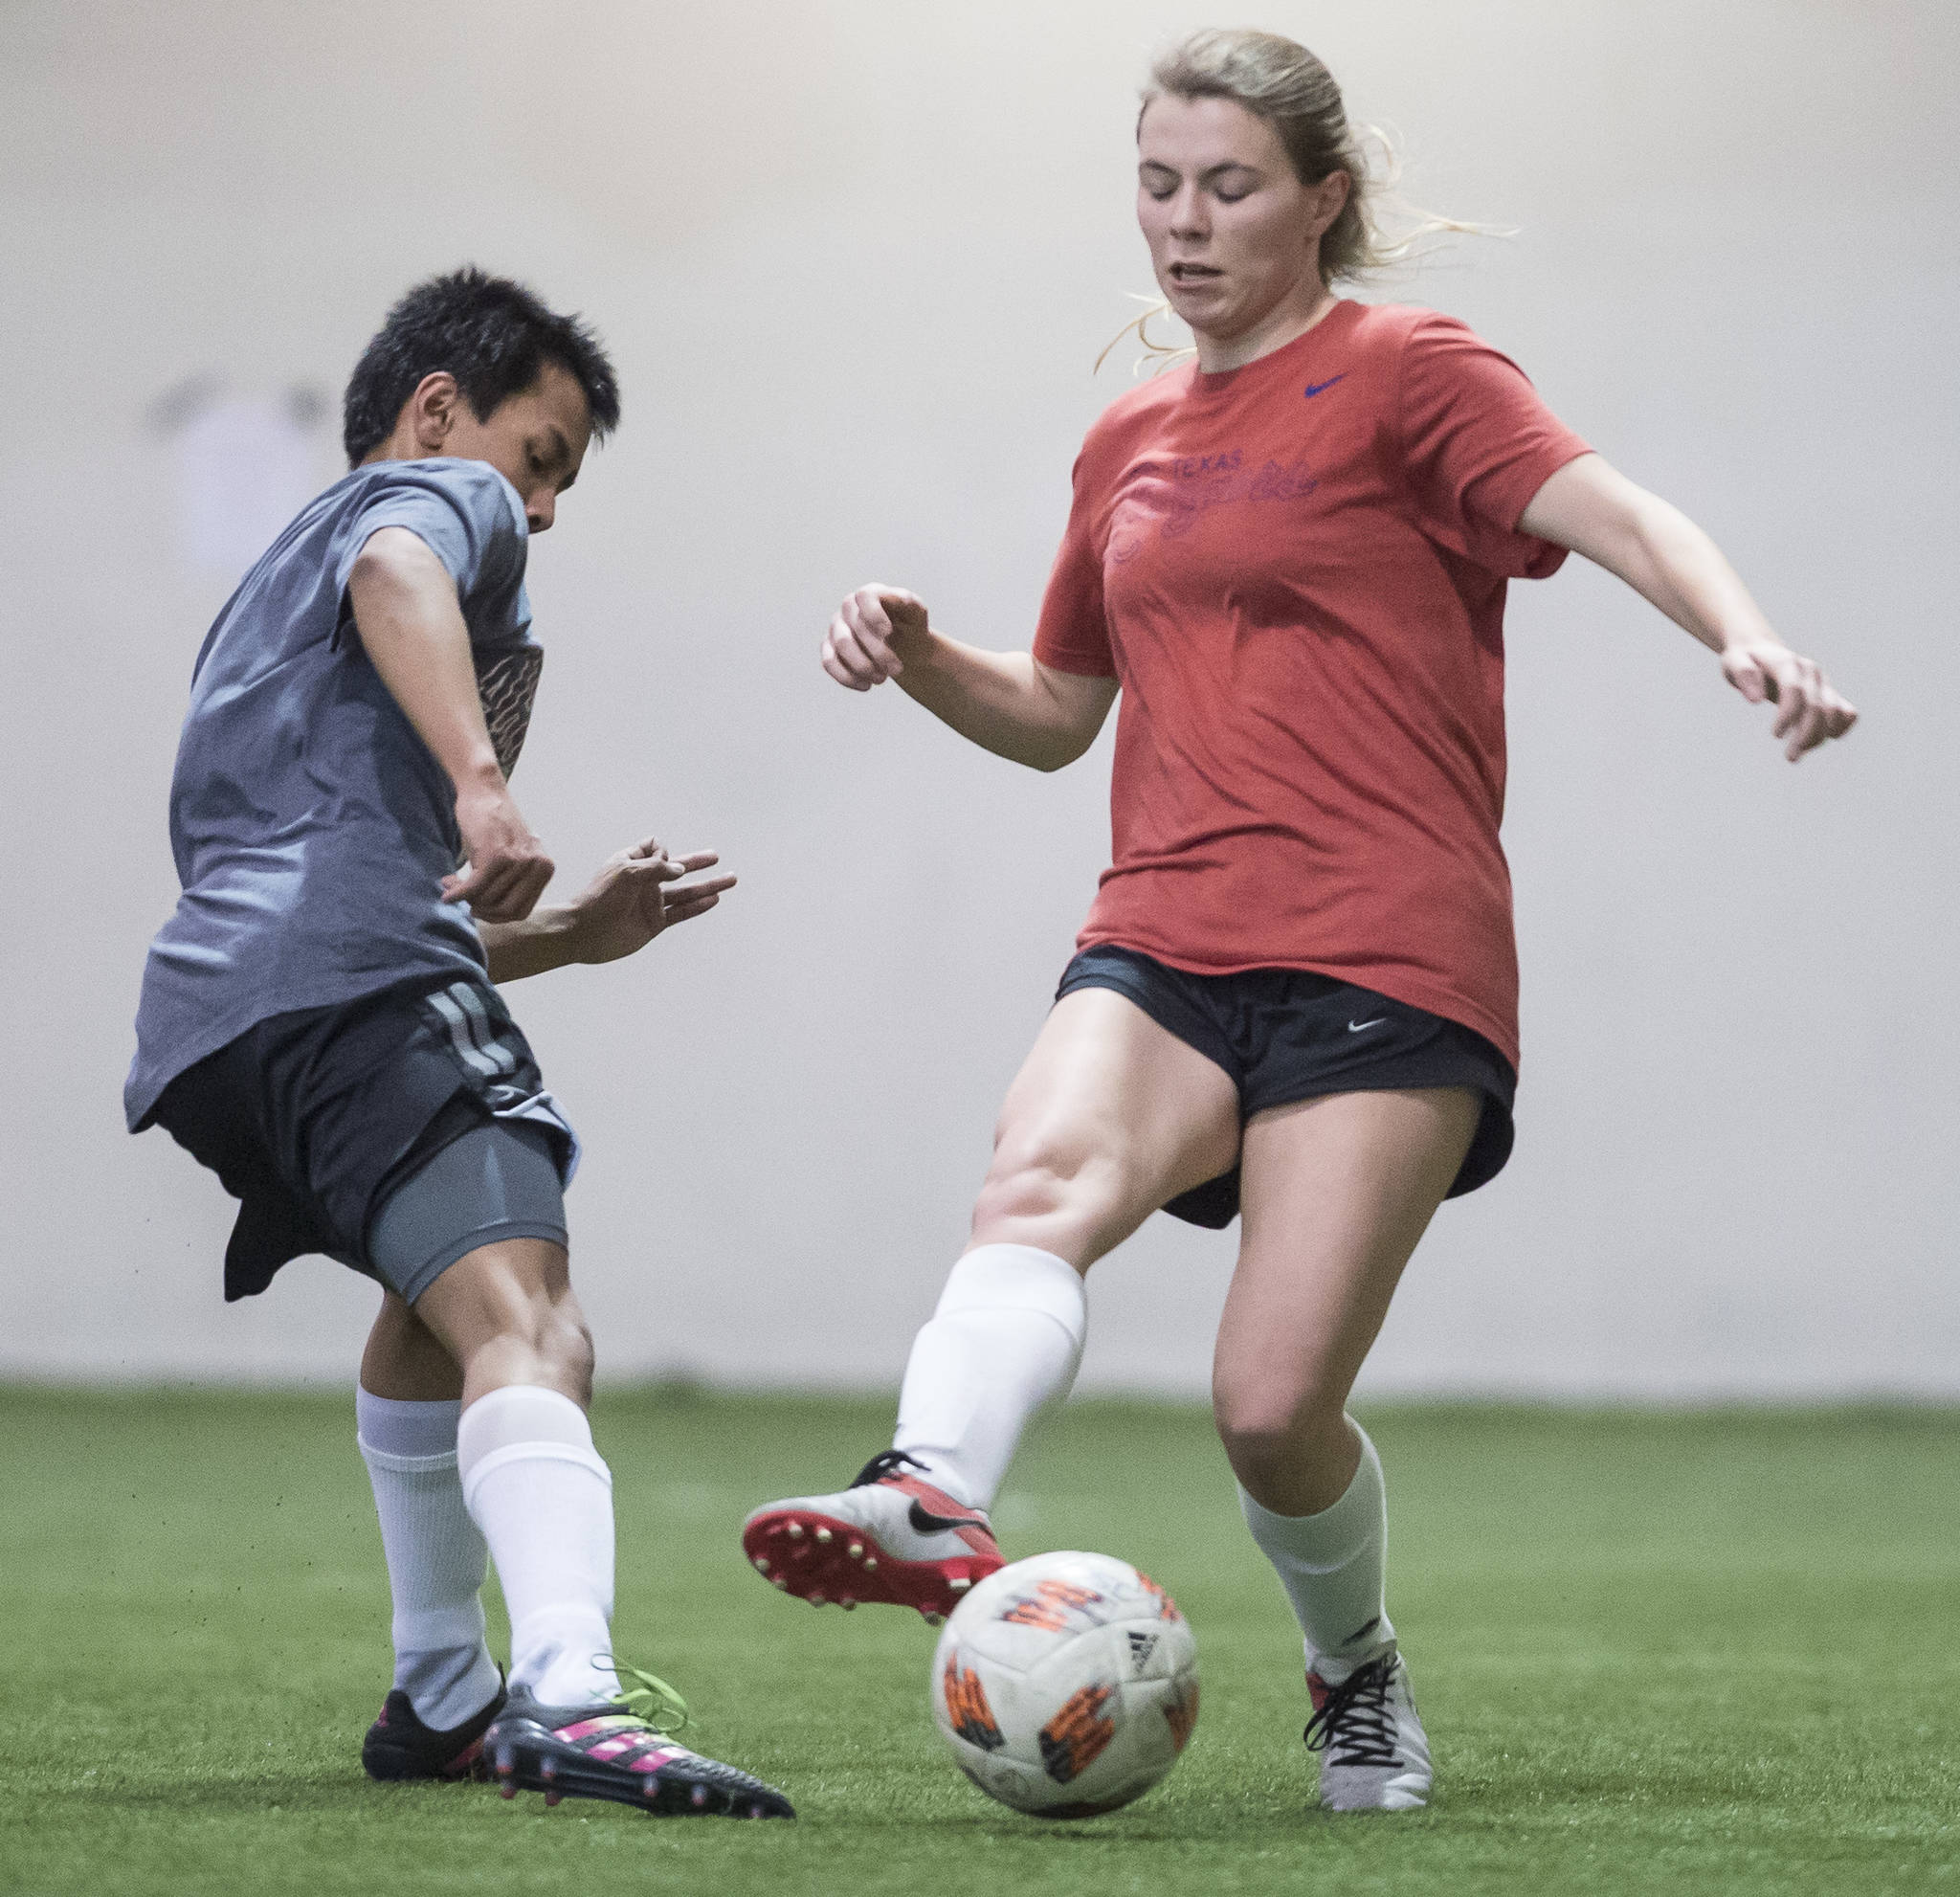 Grinch Gang, red, competes against Black Ice, black, in the finals of the senior division at the annual Holiday Cup Soccer Tournament at the Wells Fargo Dimond Park Field House on Monday, Dec. 31, 2018. The Grinch Gang won 8-2. (Michael Penn | Juneau Empire)